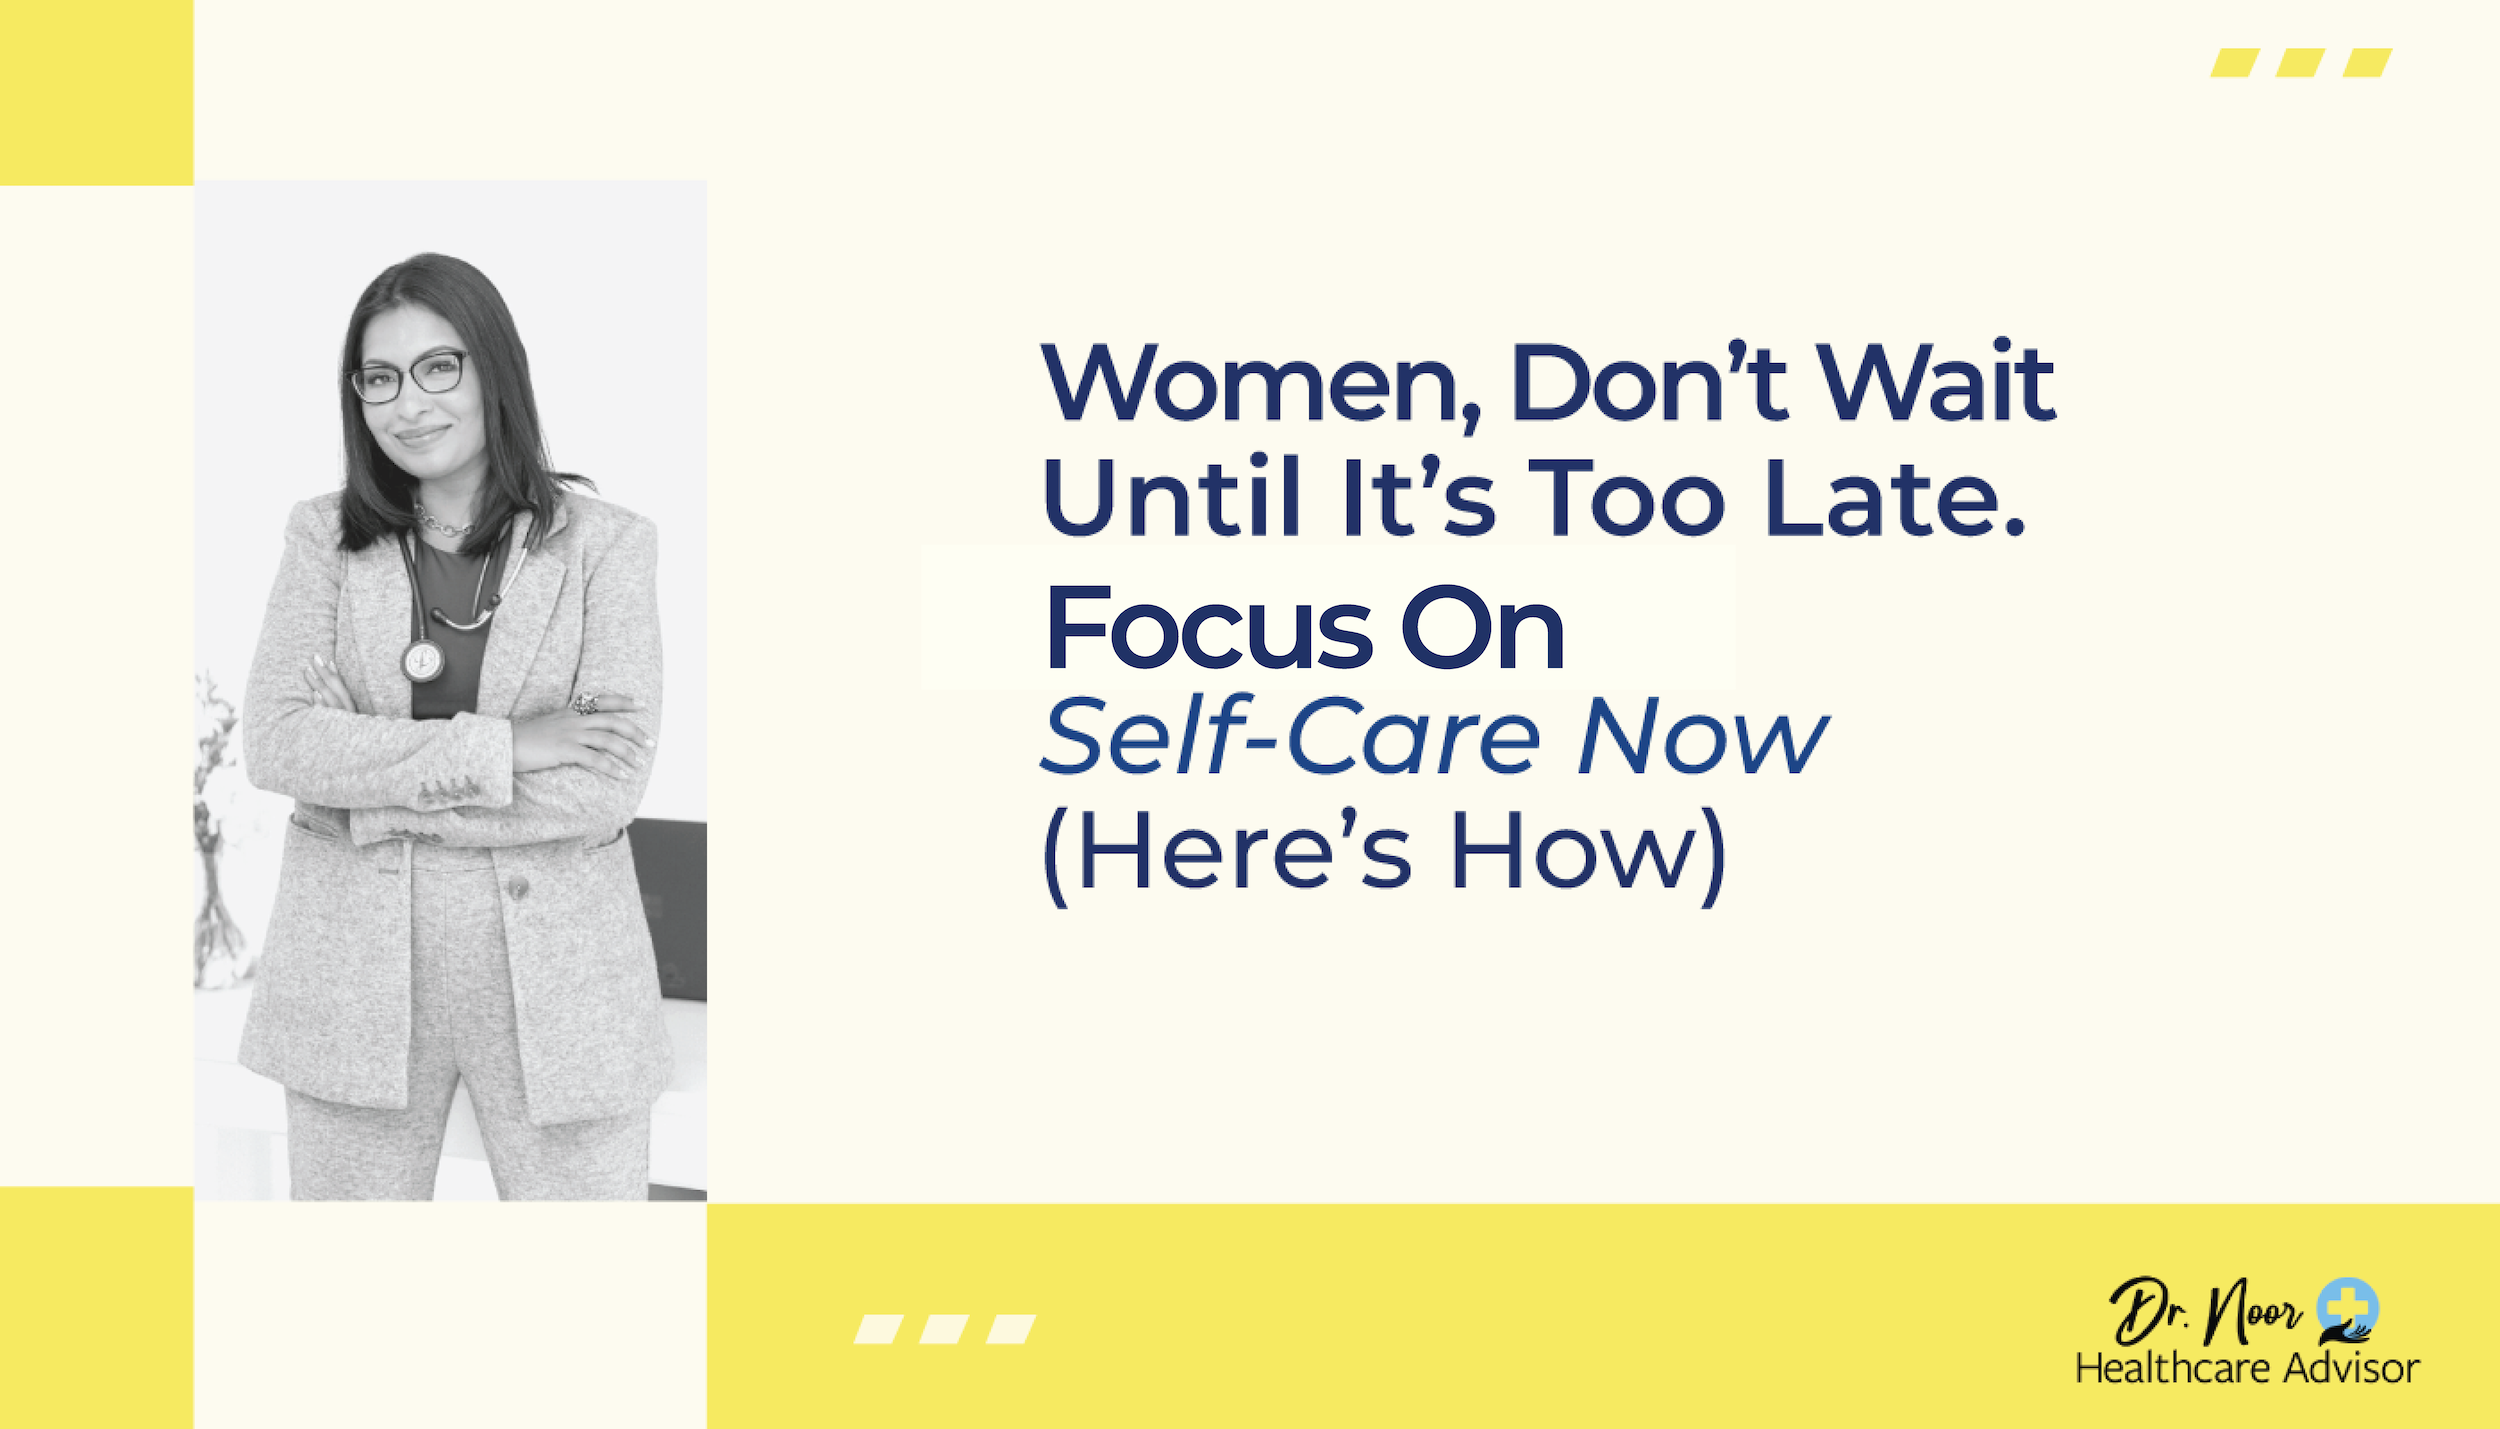 Women, Don’t Wait Until It’s Too Late. Focus on Your Self Care Journey Now (Here’s How)